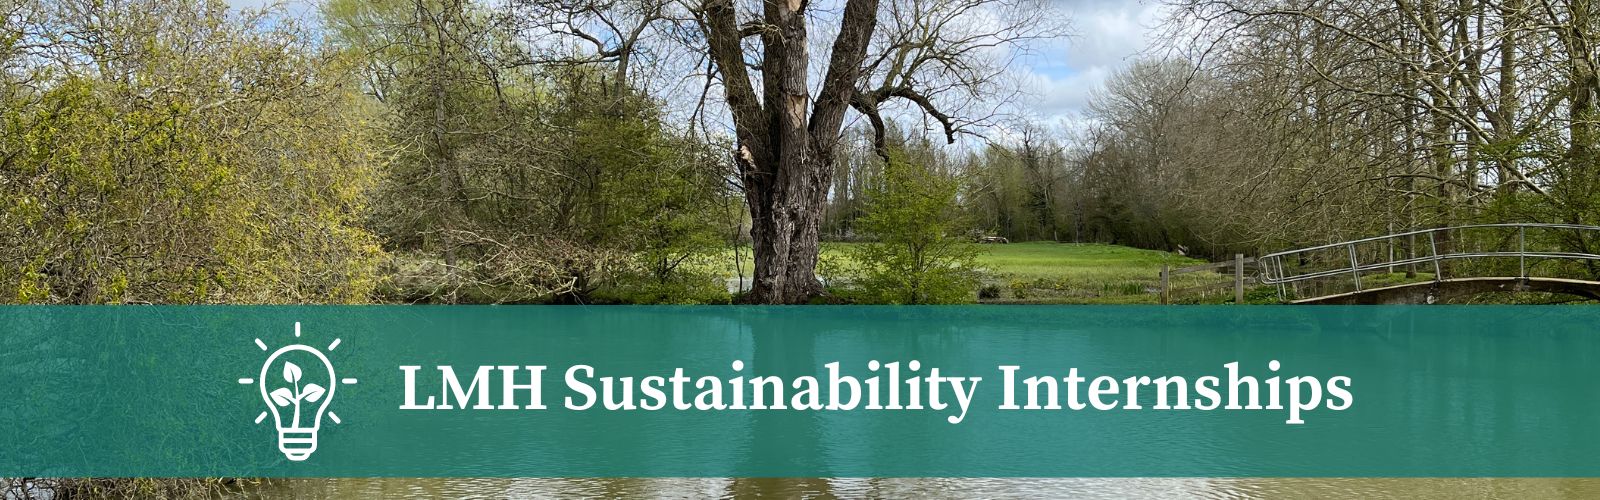 Photo of a tree by the side of a river with the text: LMH Sustainability Internships